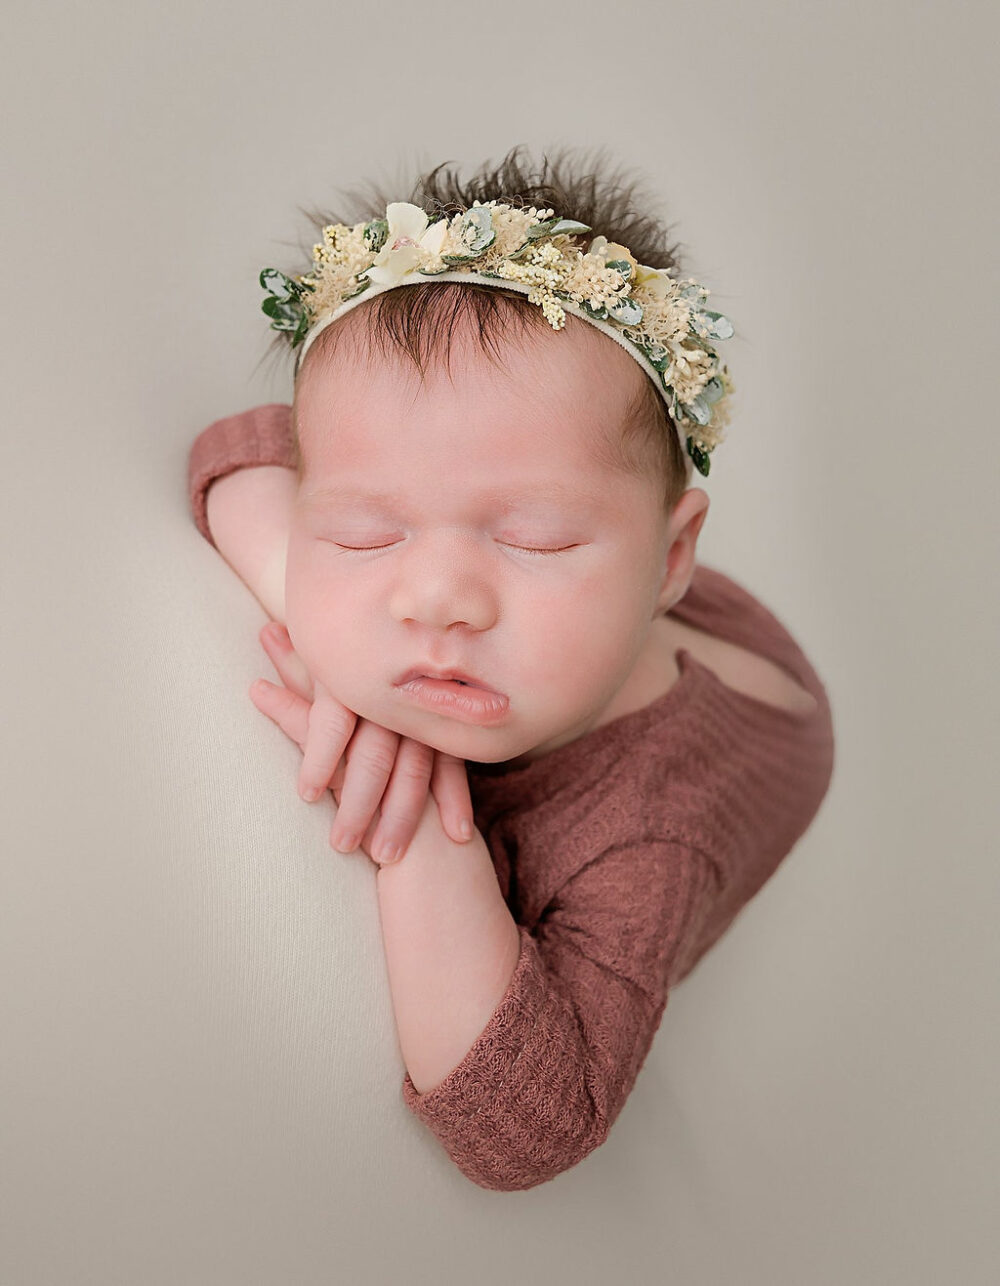 Close up of sleeping infant girl in newborn outfit wearing flowery headband for her summer newborn session in Pemberton, New Jersey.